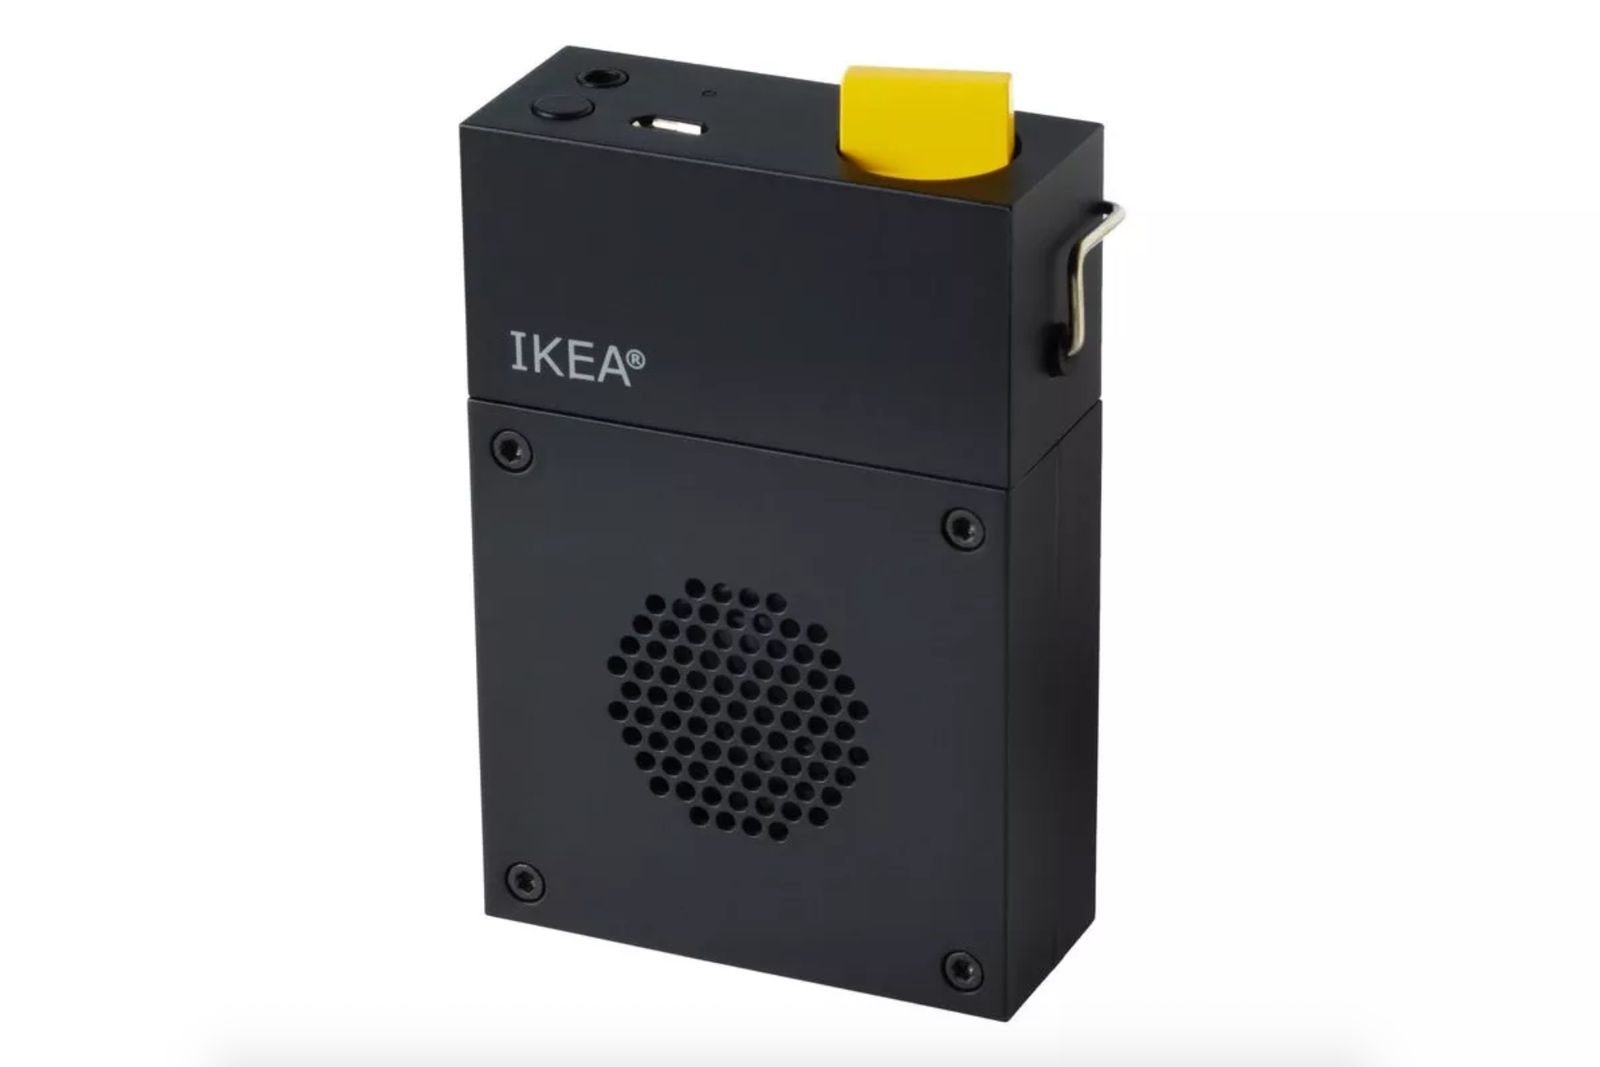 Ikea Launches A New Party Speaker Range With Teenage Engineering image 1